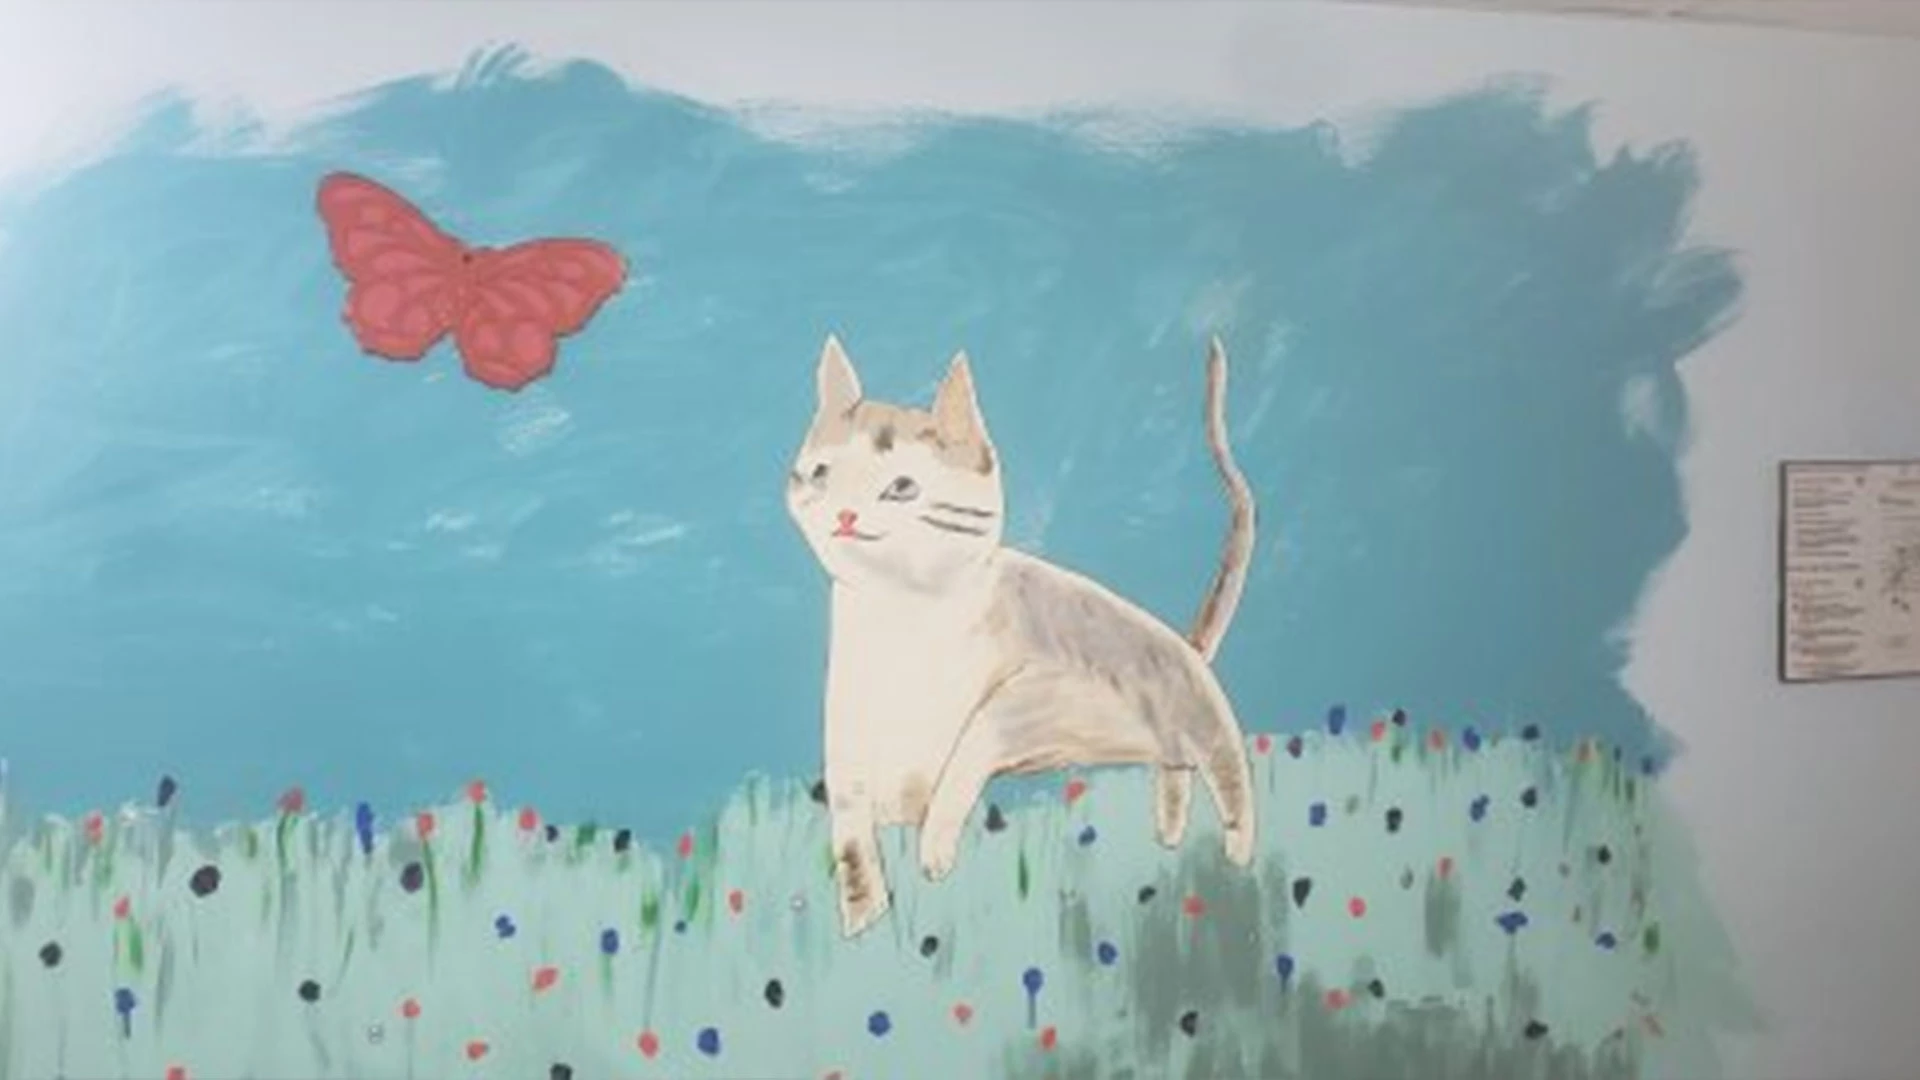 Painting of a cat and butterfly on the wall